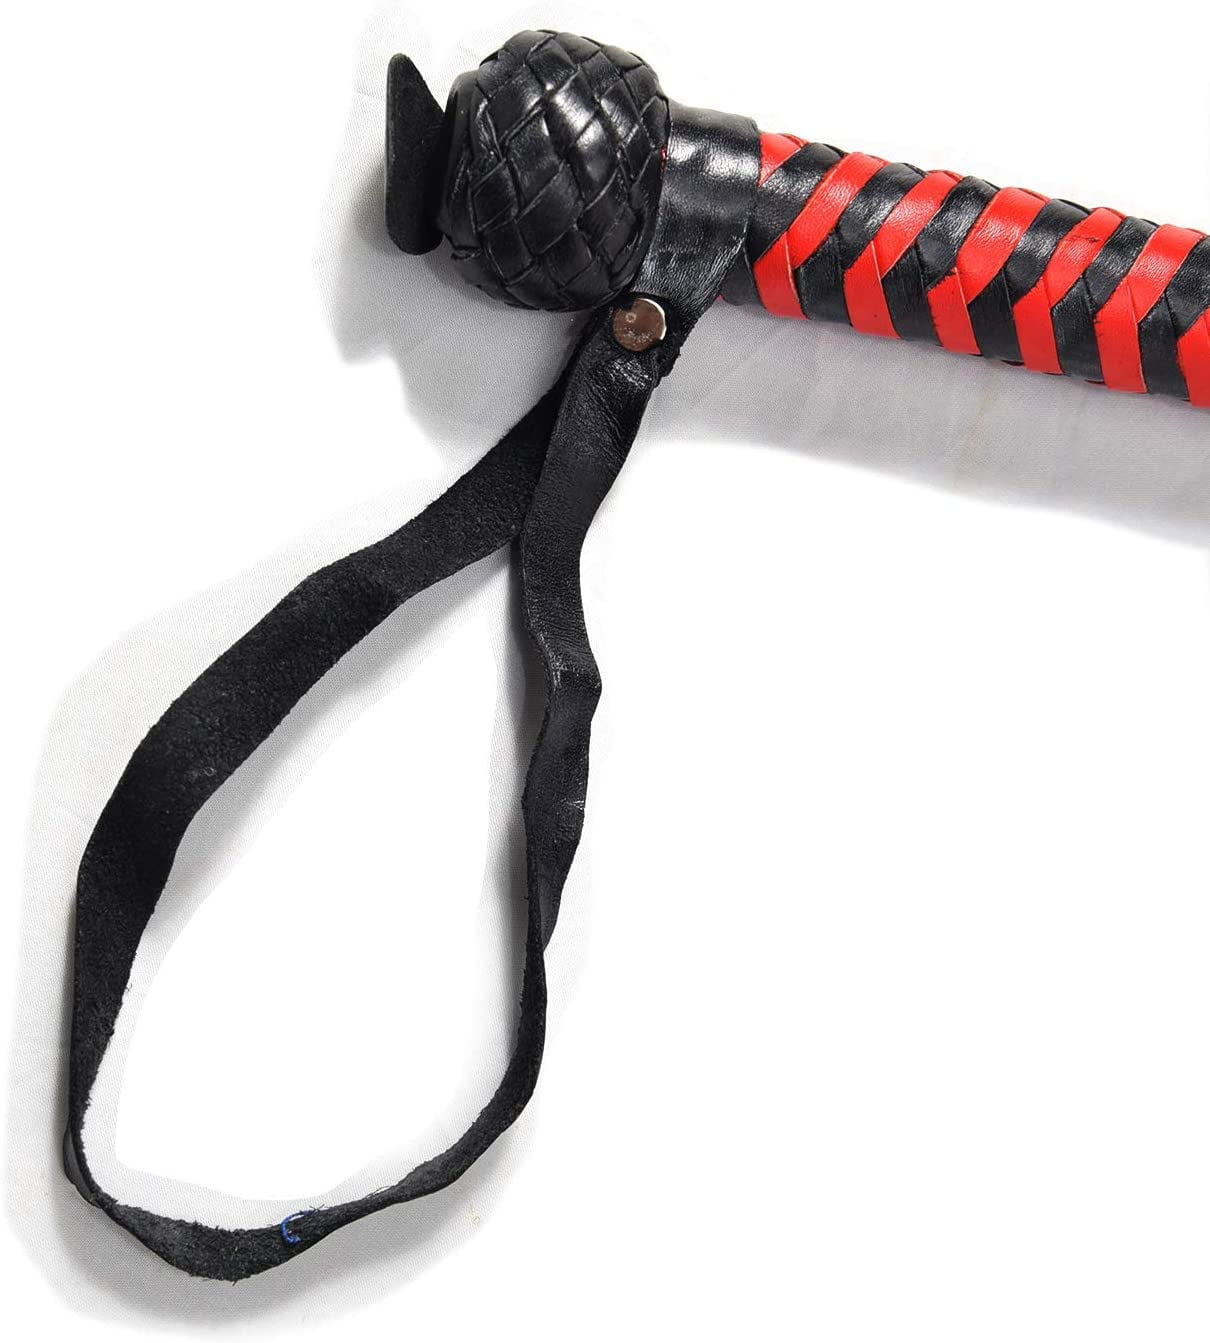 BARE SUTRA Horse Crop Whip Braided Heavy-Duty Handle Fully Handmade Genuine Leather Whips Horse & Bull Obedience Training Whips Plait Weaved Riding Crops Whip 4 feet, Black & Orange